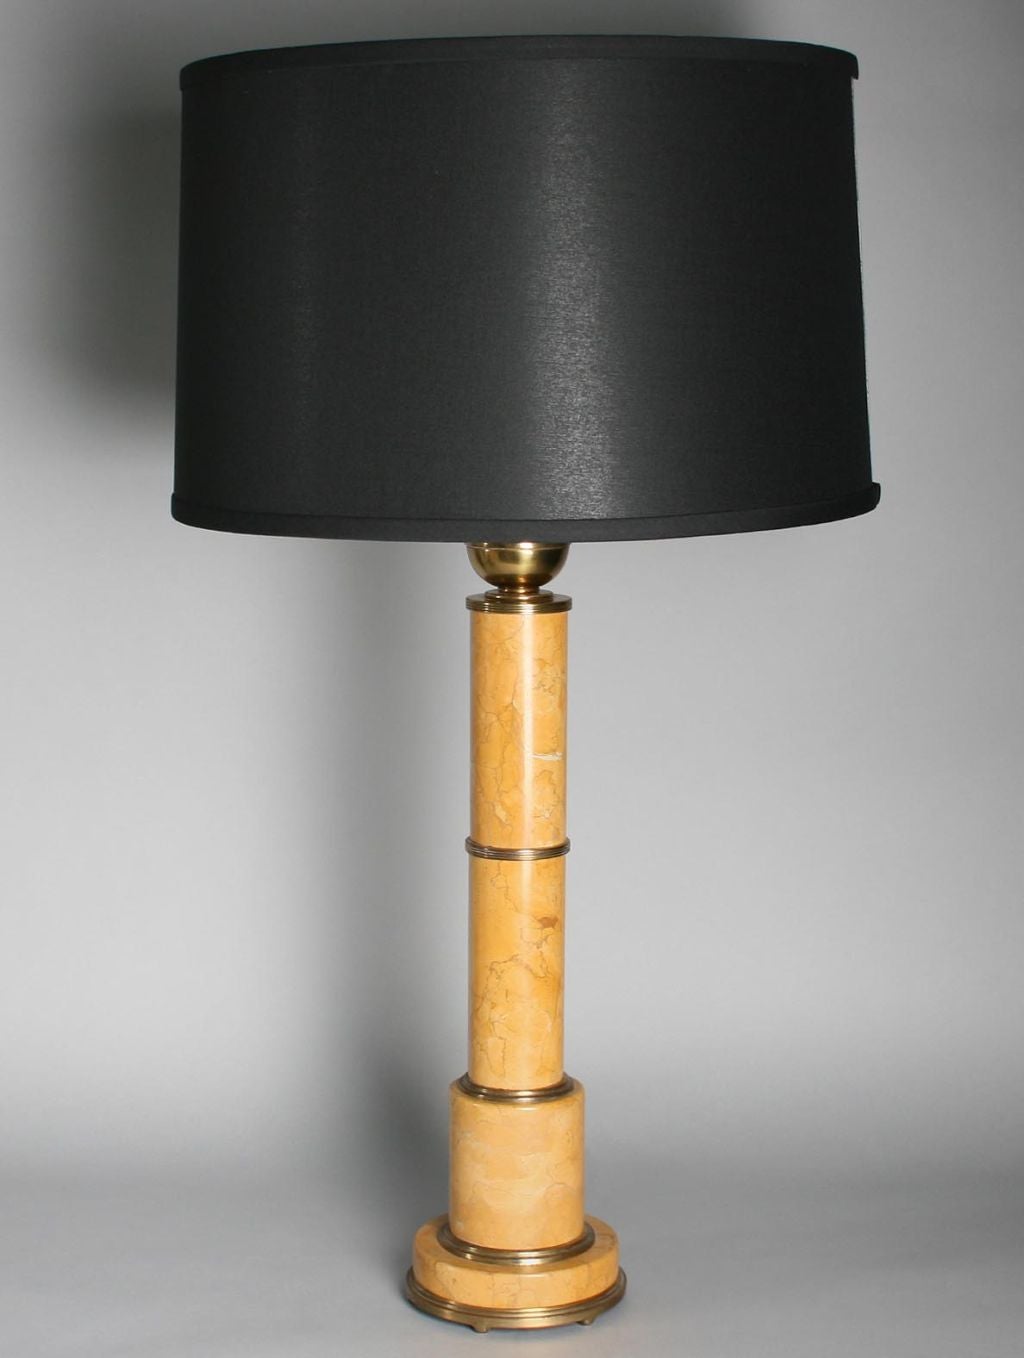 This handsome marble lamp has a commanding presence.